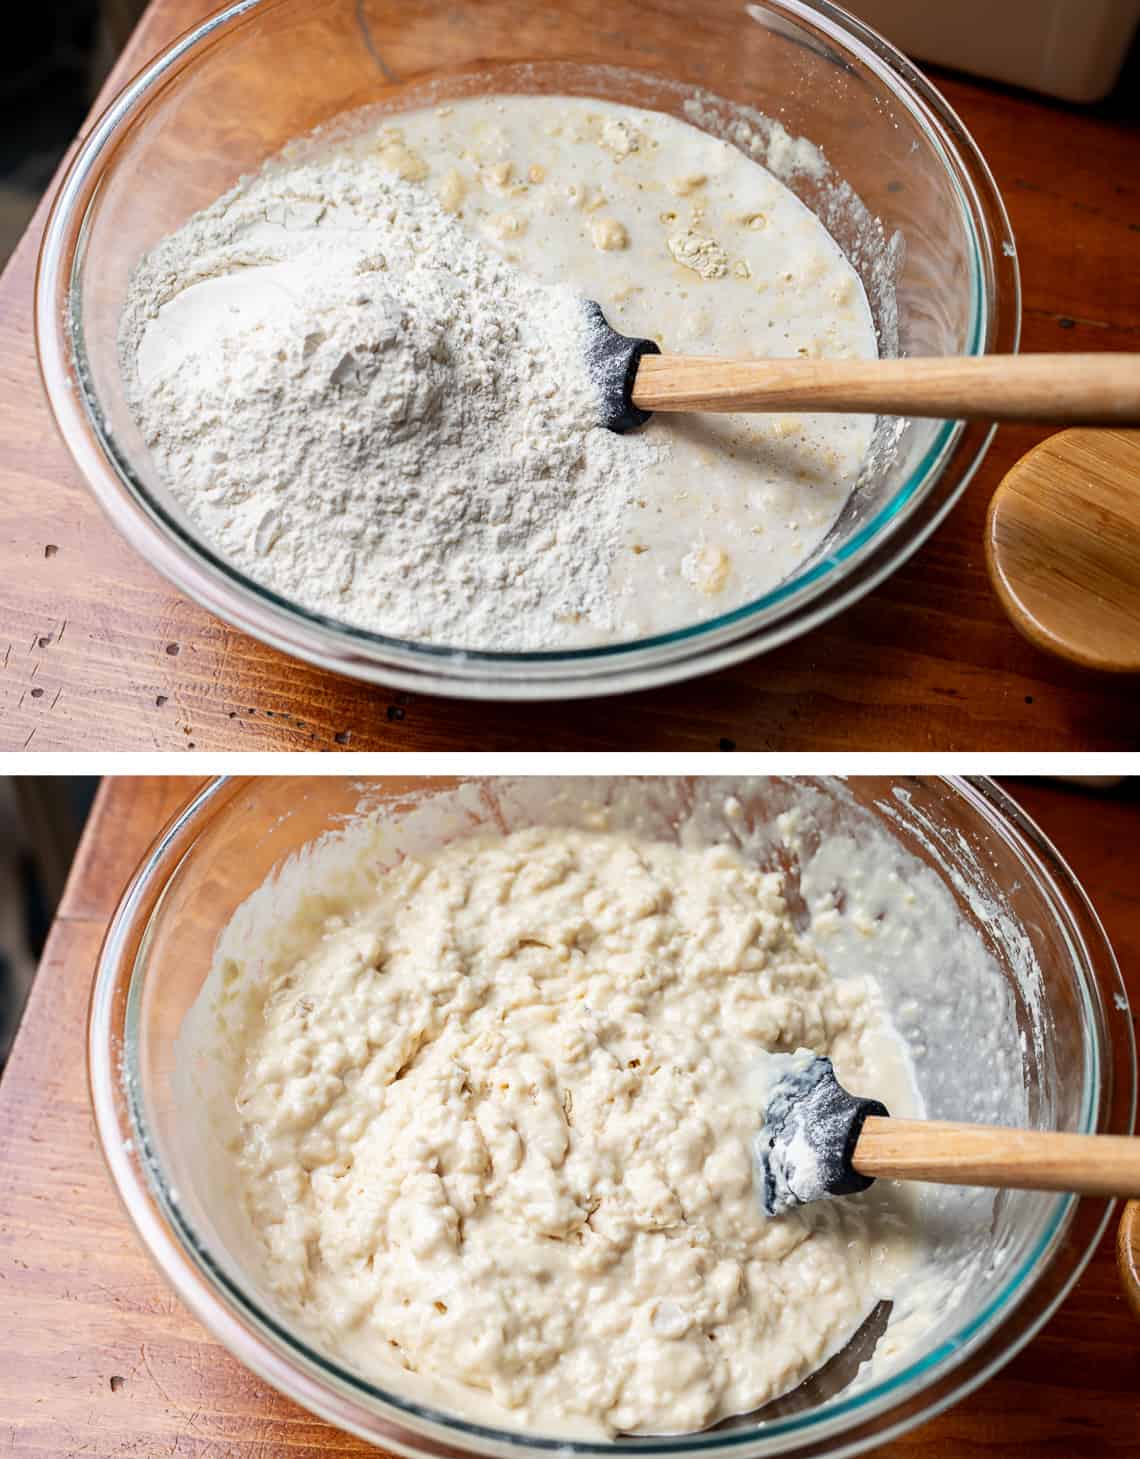 top, flour poured on top of yeast mixture, bottom the flour all mixed in.